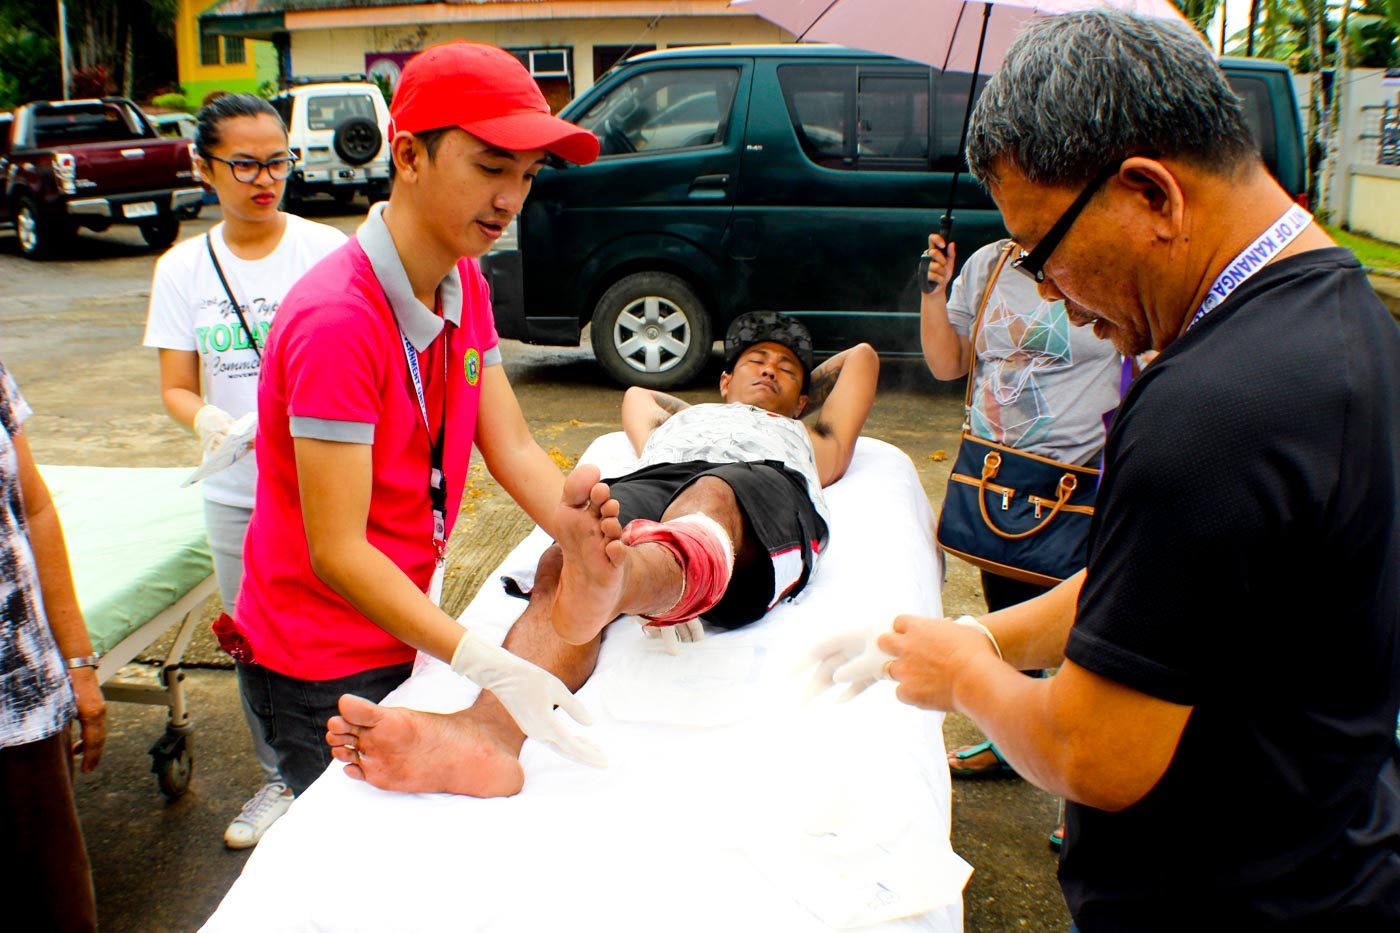 INJURED. Charlie Menosa, 32, got injured after he jumped out of the window of his house during the earthquake. Photo by Jazmin Bonifacio/Rappler 